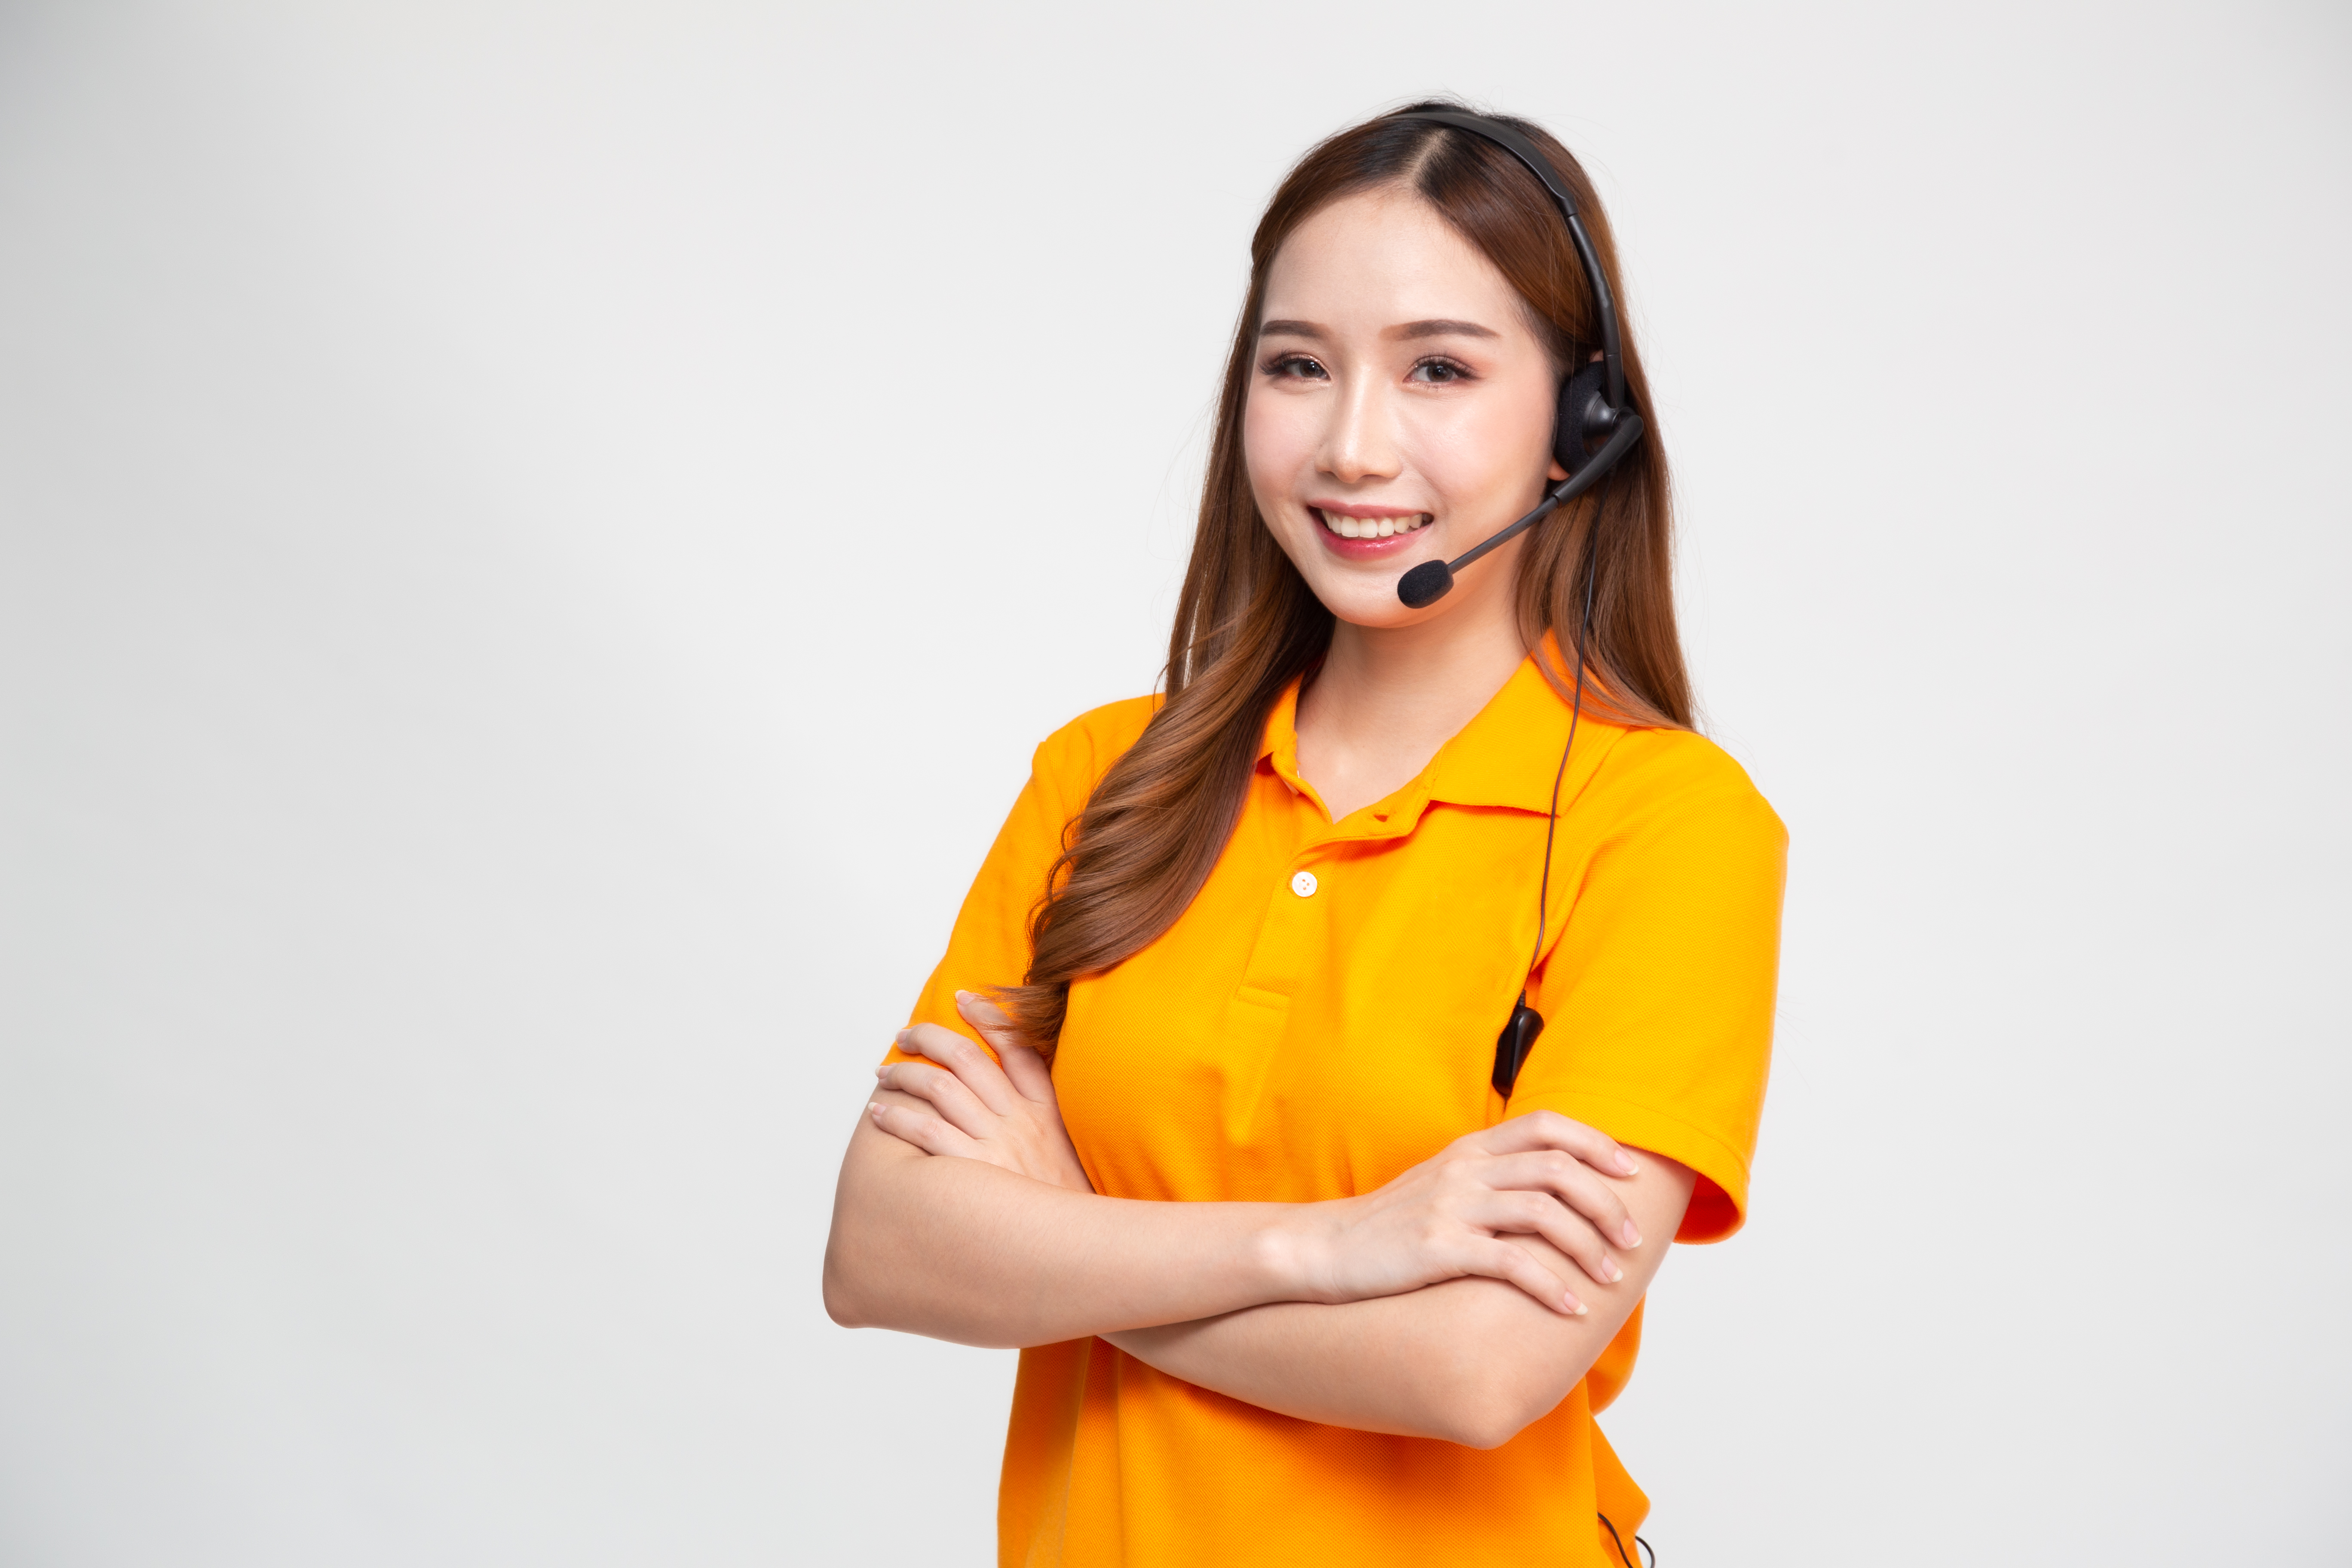 Portrait of happy smiling asian woman telemarketing operator in orange delivery uniform with headphone isolated on white background, Call center or Customer service concept